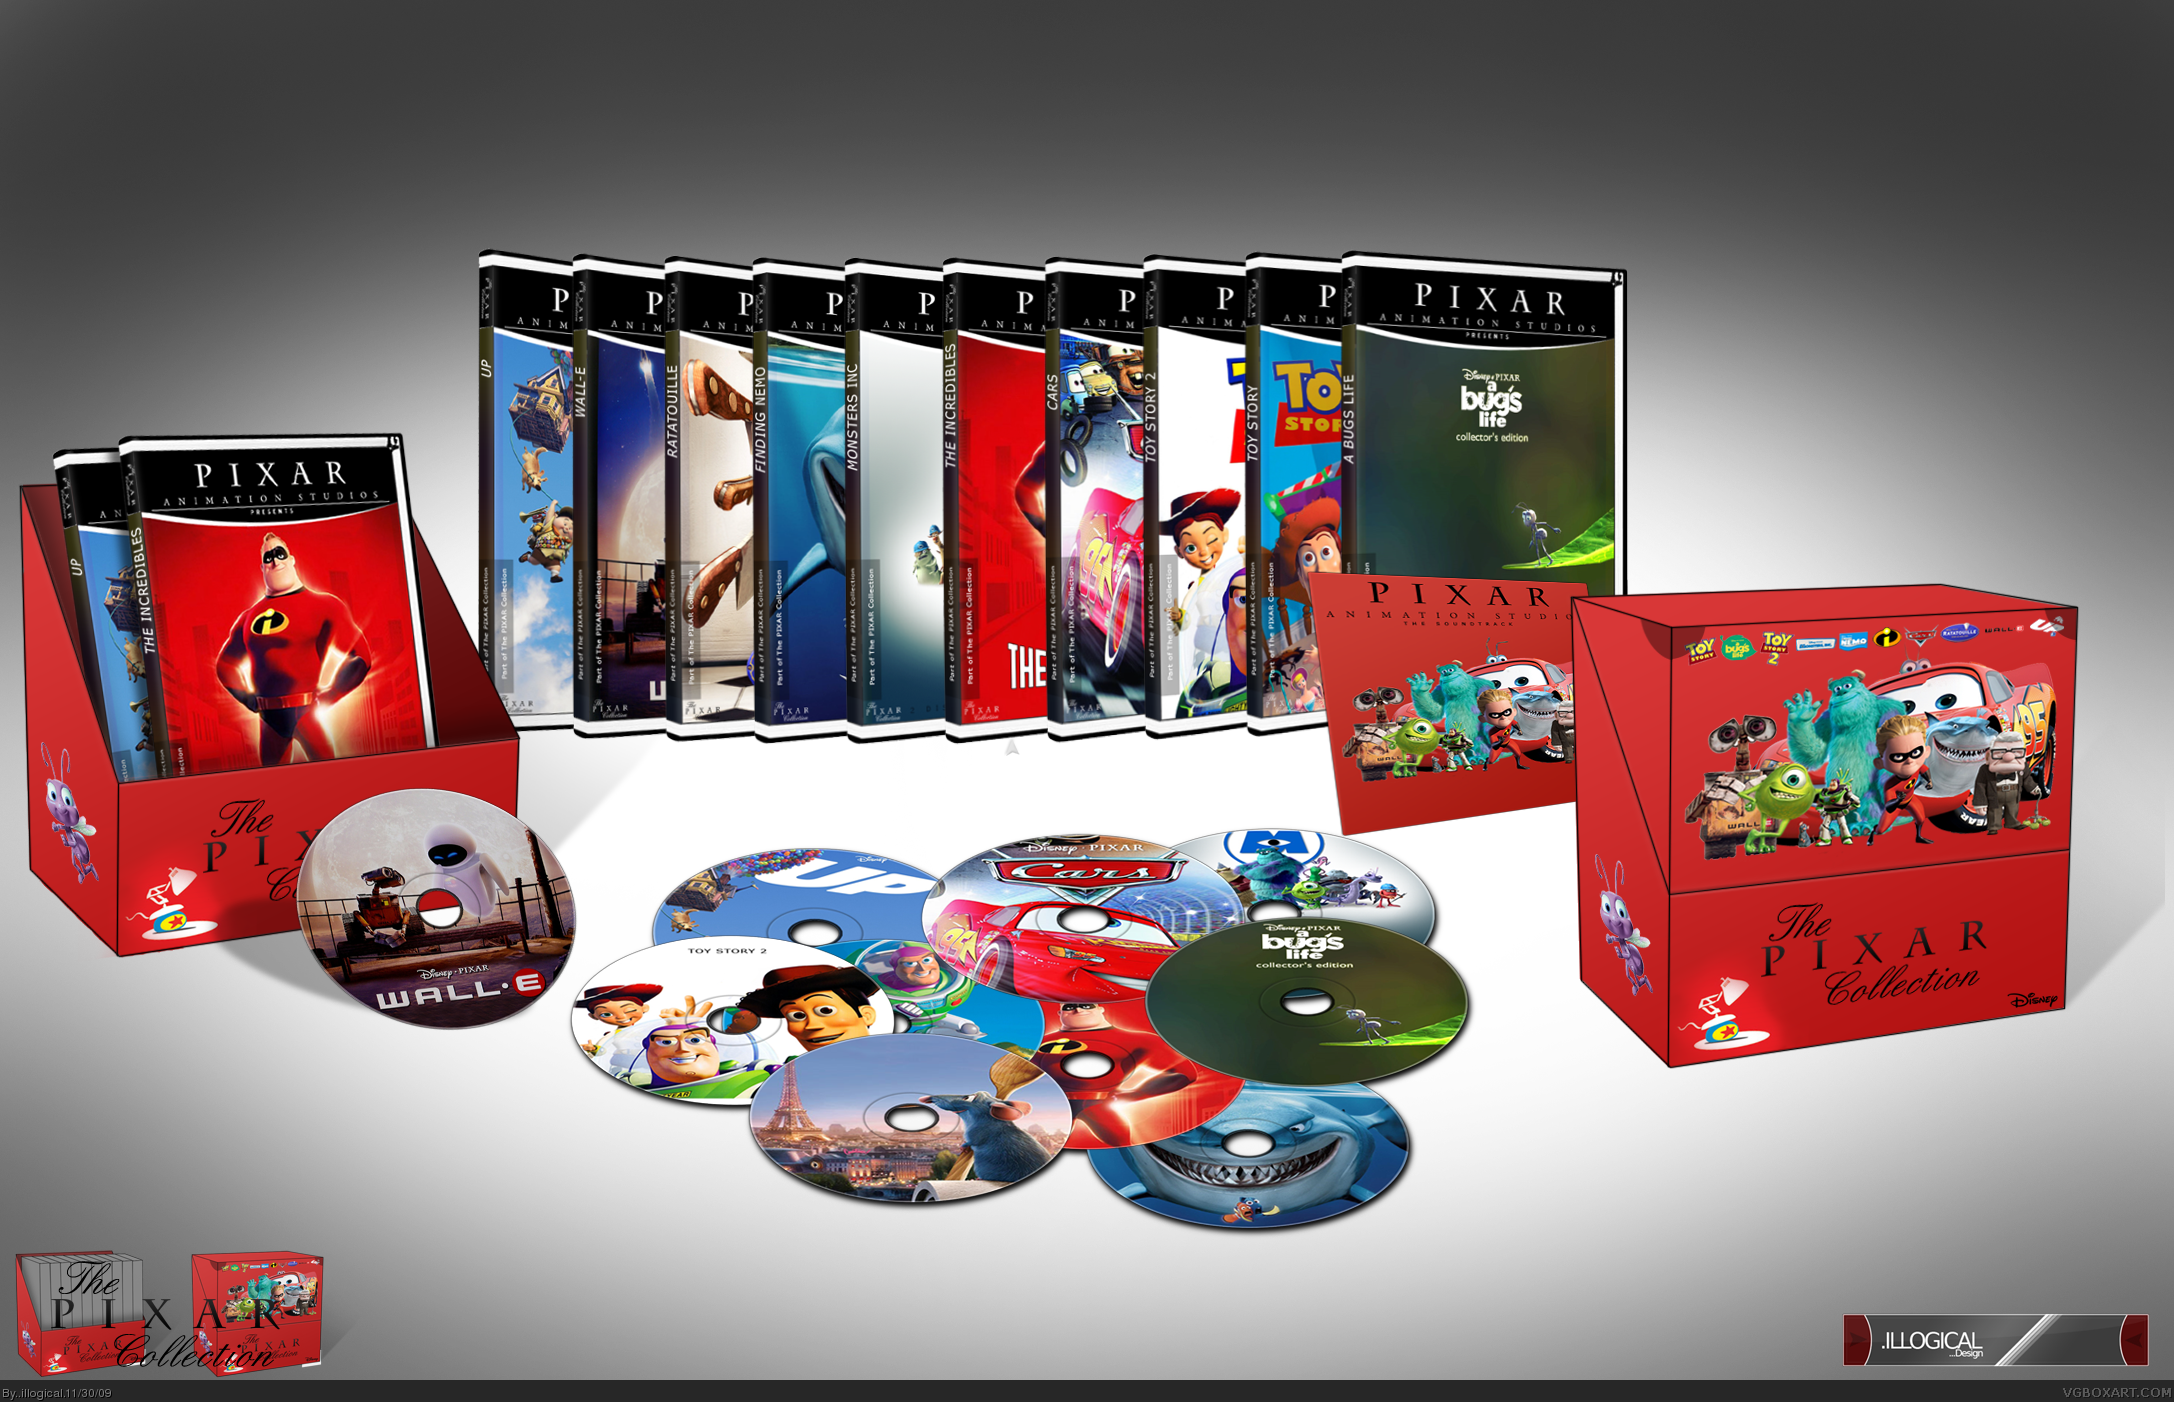 The Pixar Collection box cover